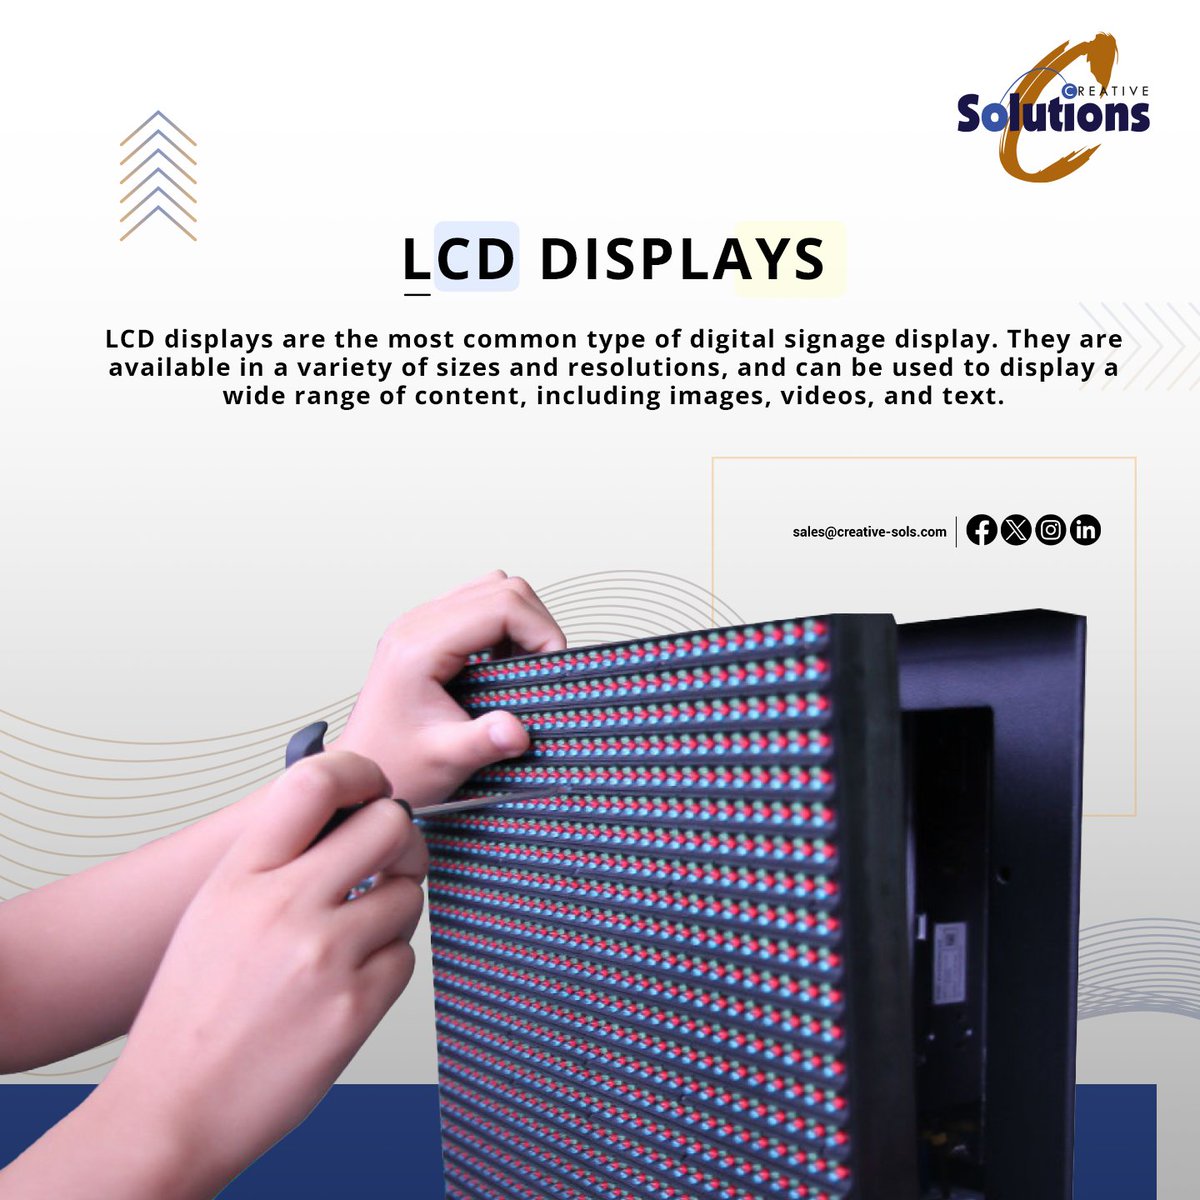 ✅Our vibrant LCD solutions will make your content stand out from the crowd! Upgrade your displays, upgrade your impact!
bit.ly/3Gkwjpl
#lcd #displays #videowall #digitalsignage #saudiarabia #فيديو #التصميم_الرقمي #السعودية #صنع_في_السعودية #الرياض #الدمام #نجران #أبها